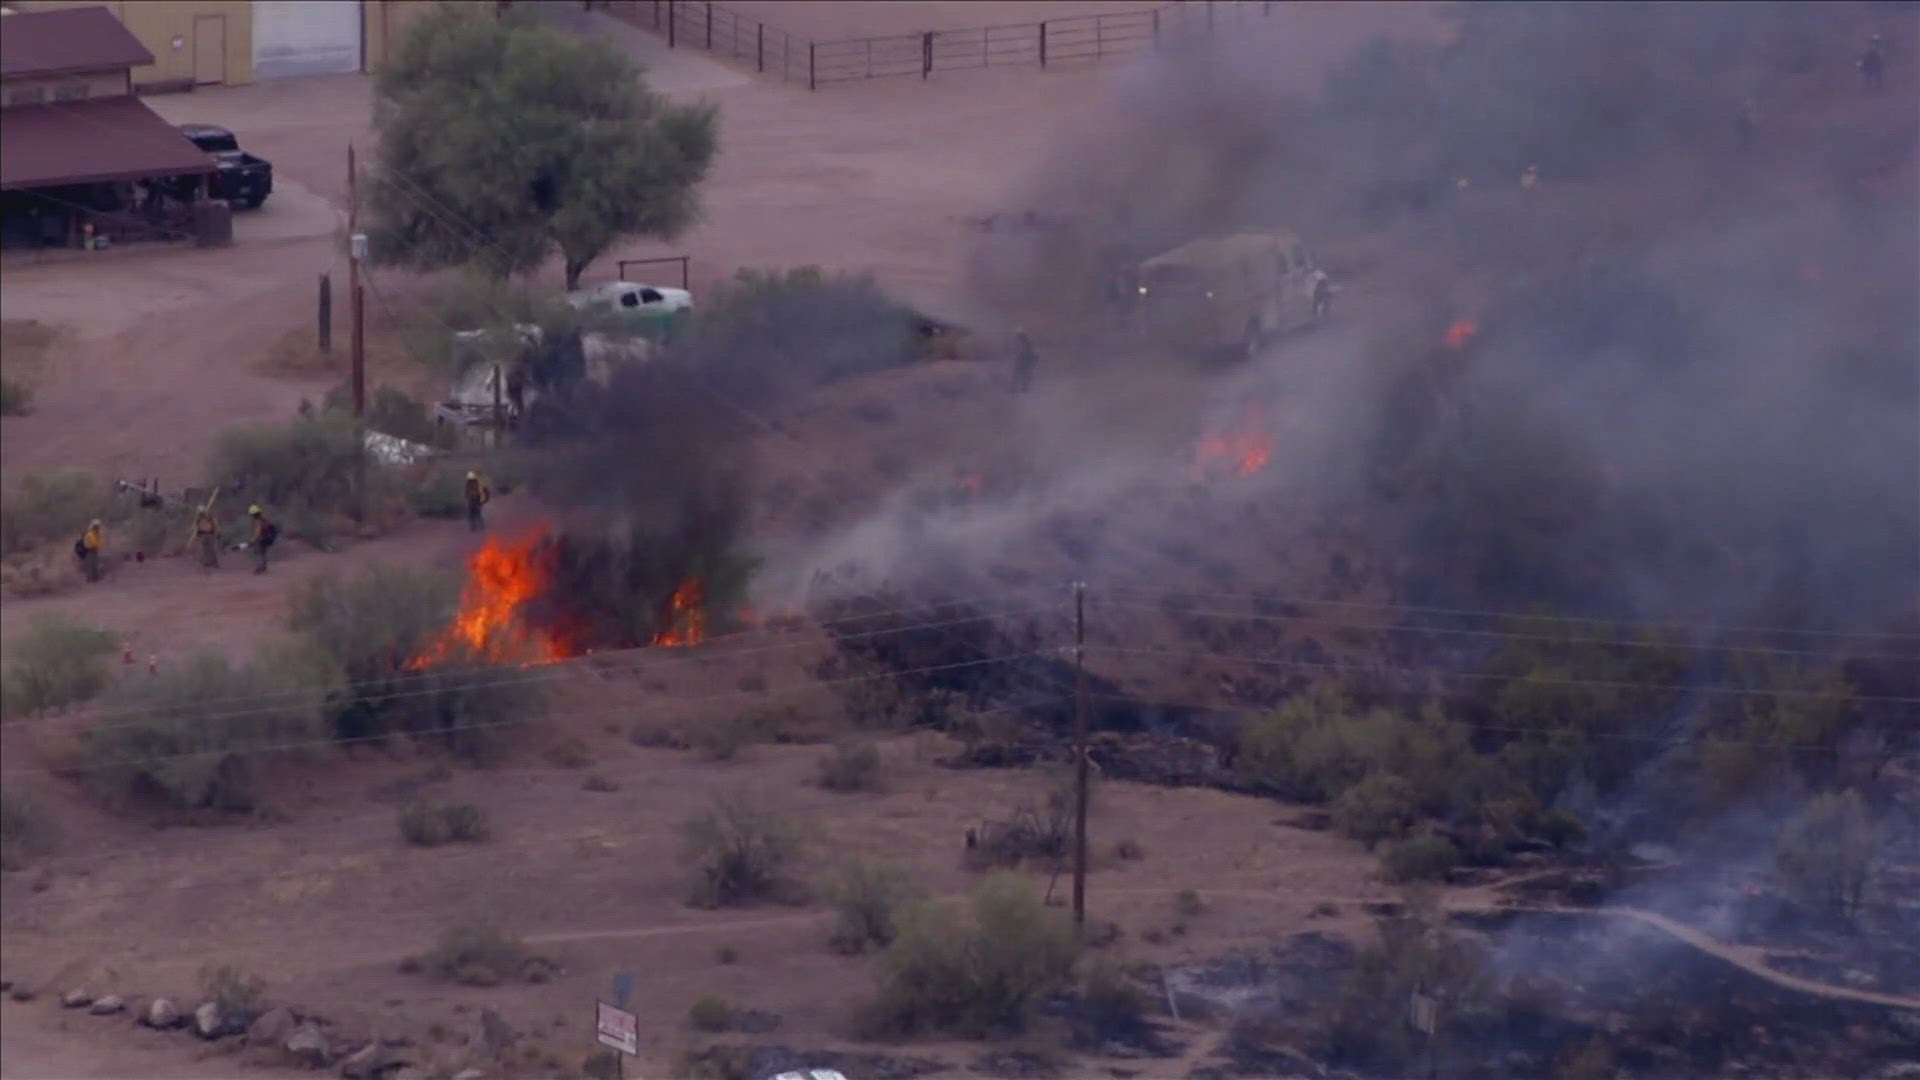 The Ghost Fire ignited near Apache Junction on Friday and is now 65% contained after burning 88 acres.